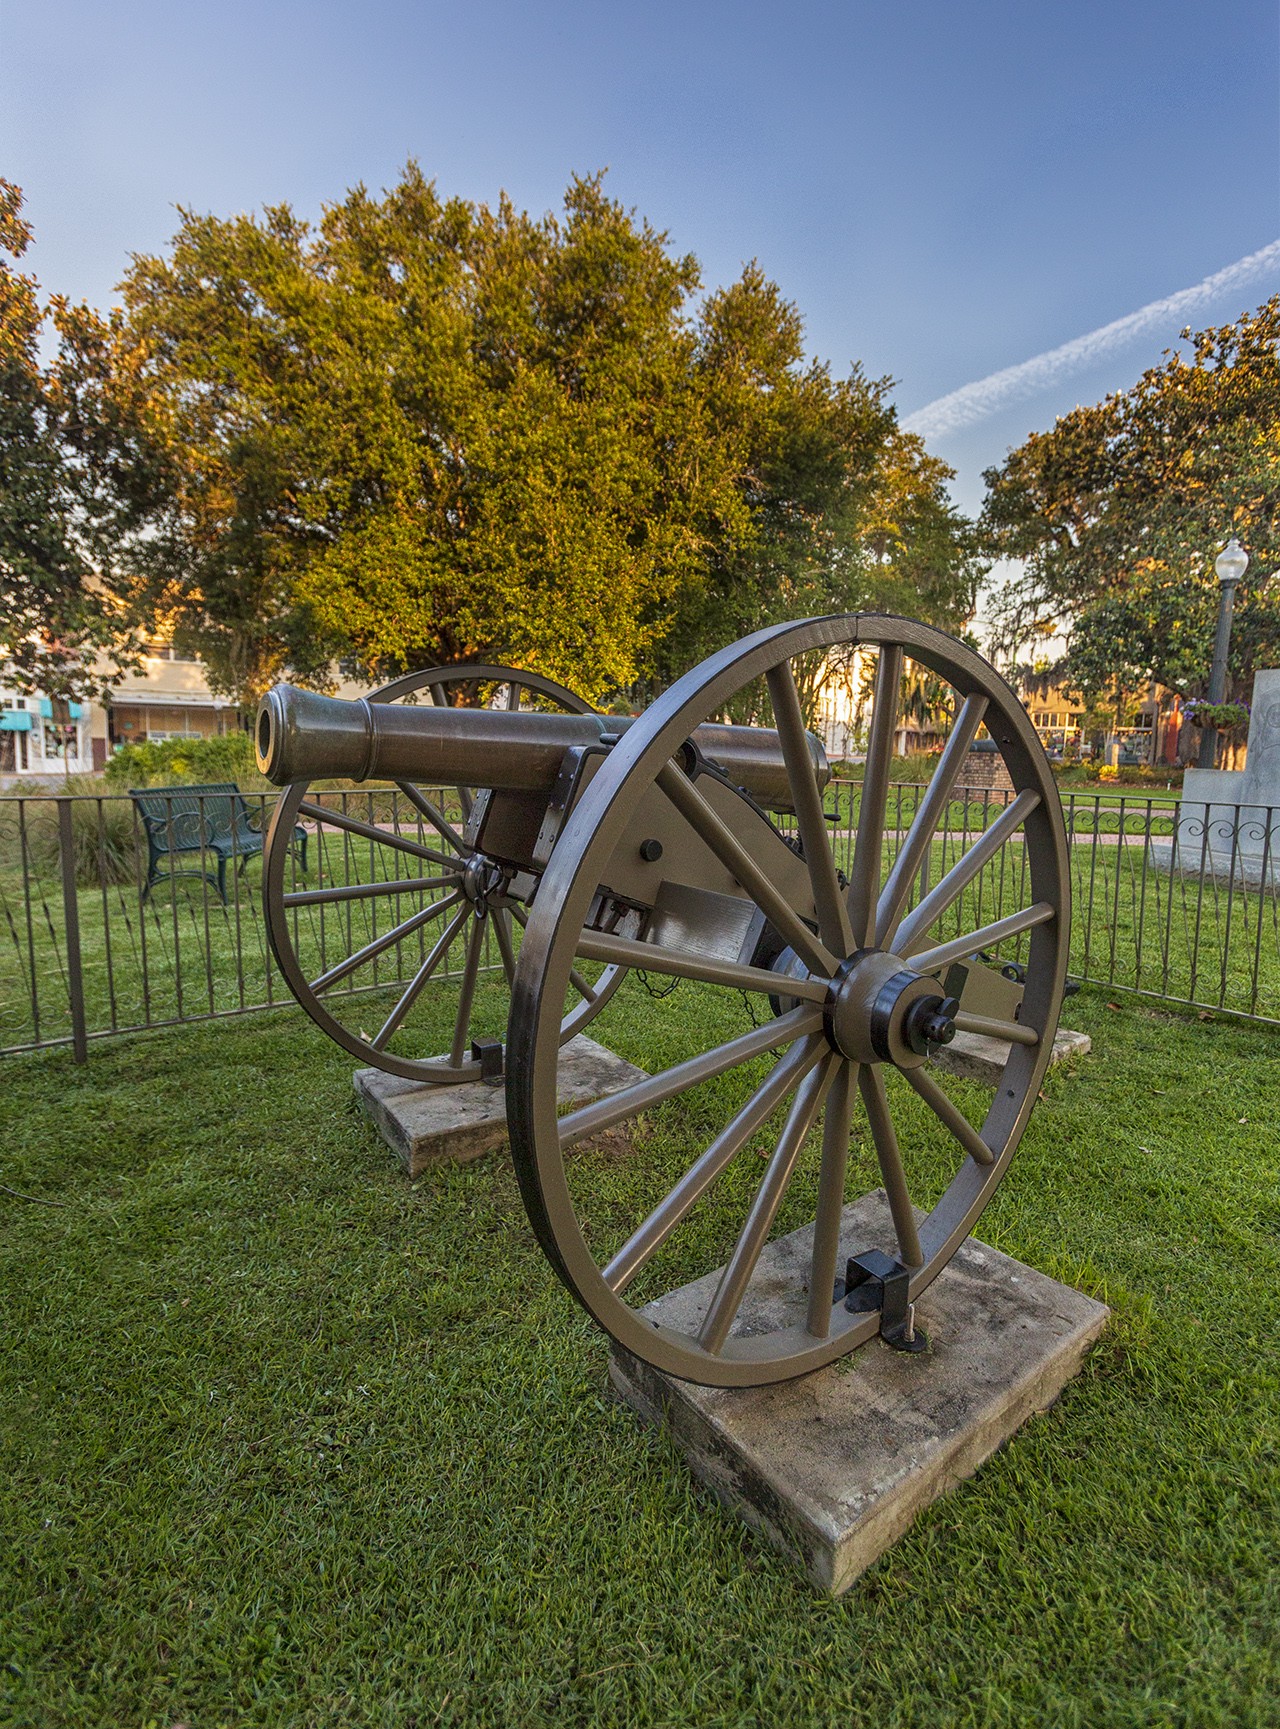 Situated in Willis Park is our newly restored Civil War Cannon. Also contained with it is a historical marker with the cannon's story and its trip to Bainbridge.